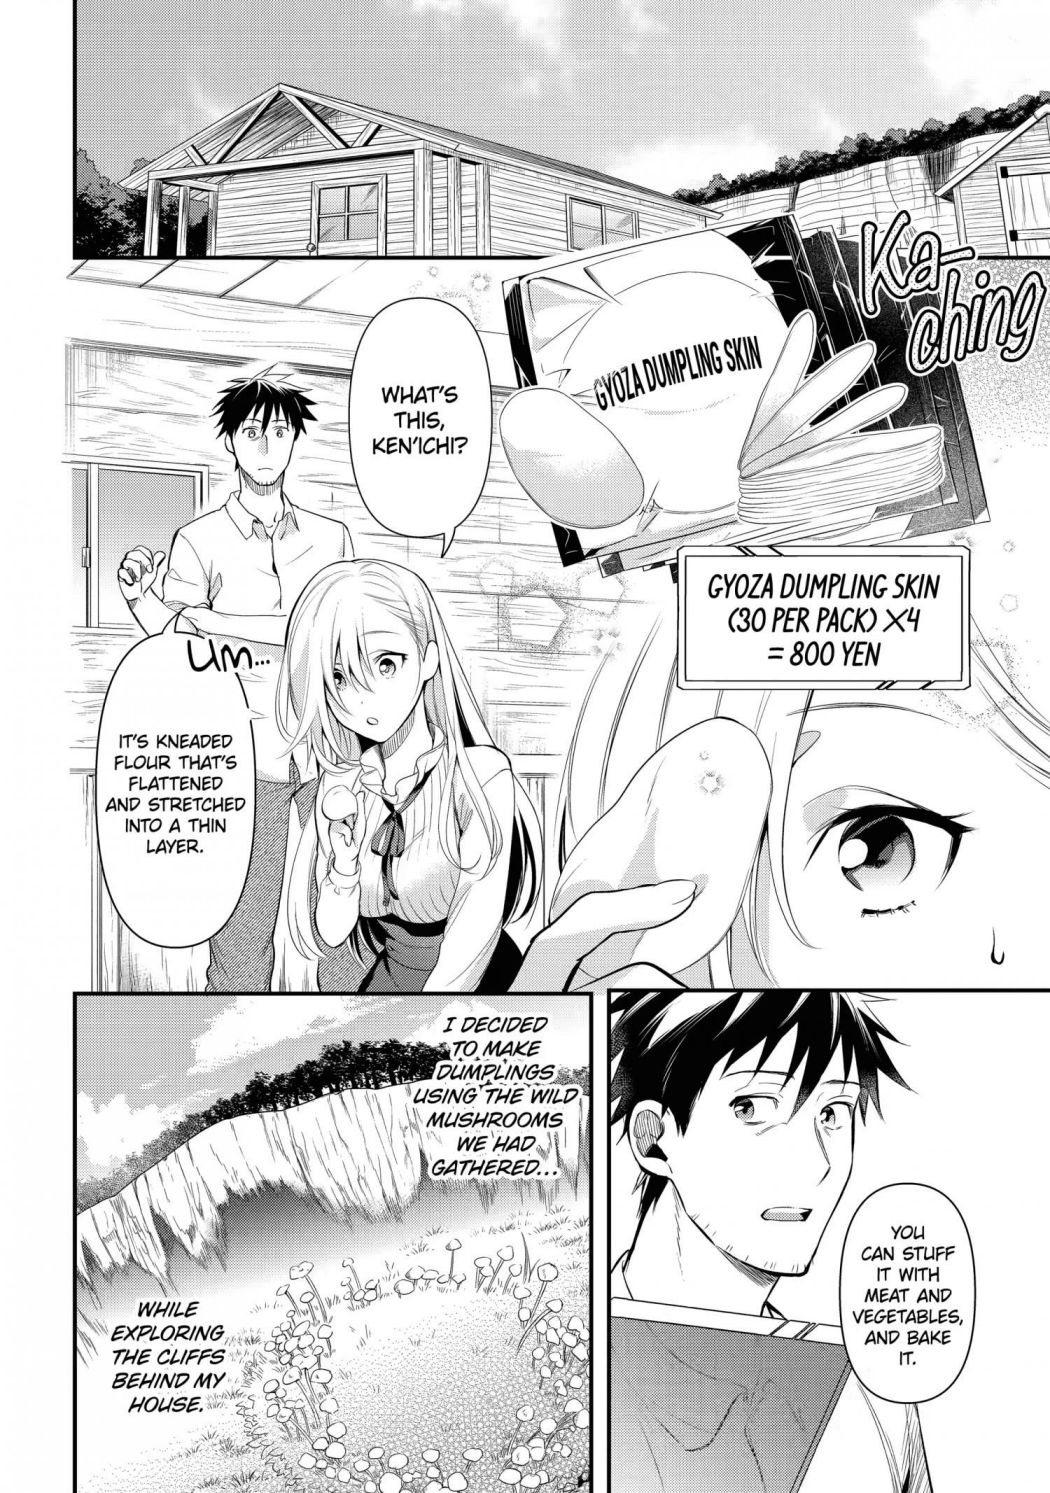 The Mail Order Life Of A Man Around 40 In Another World - Page 2